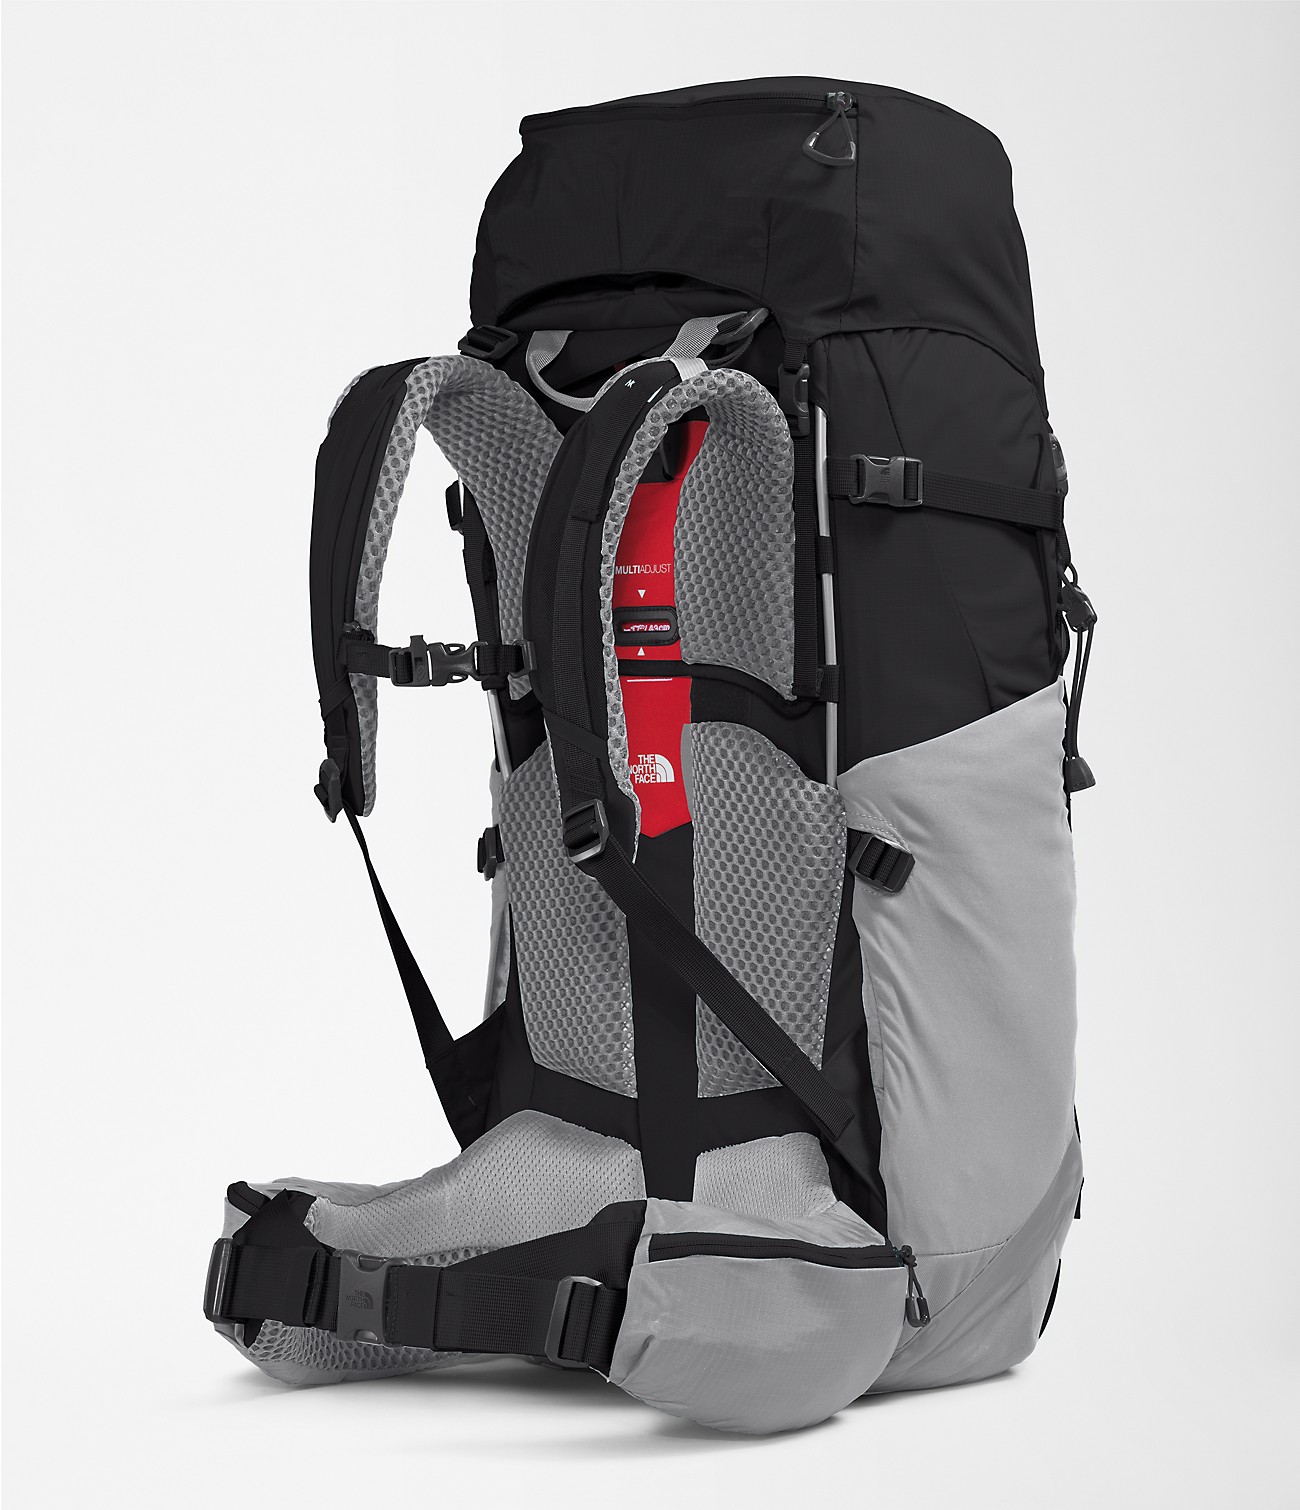 Women’s Trail Lite Backpack | The North Face